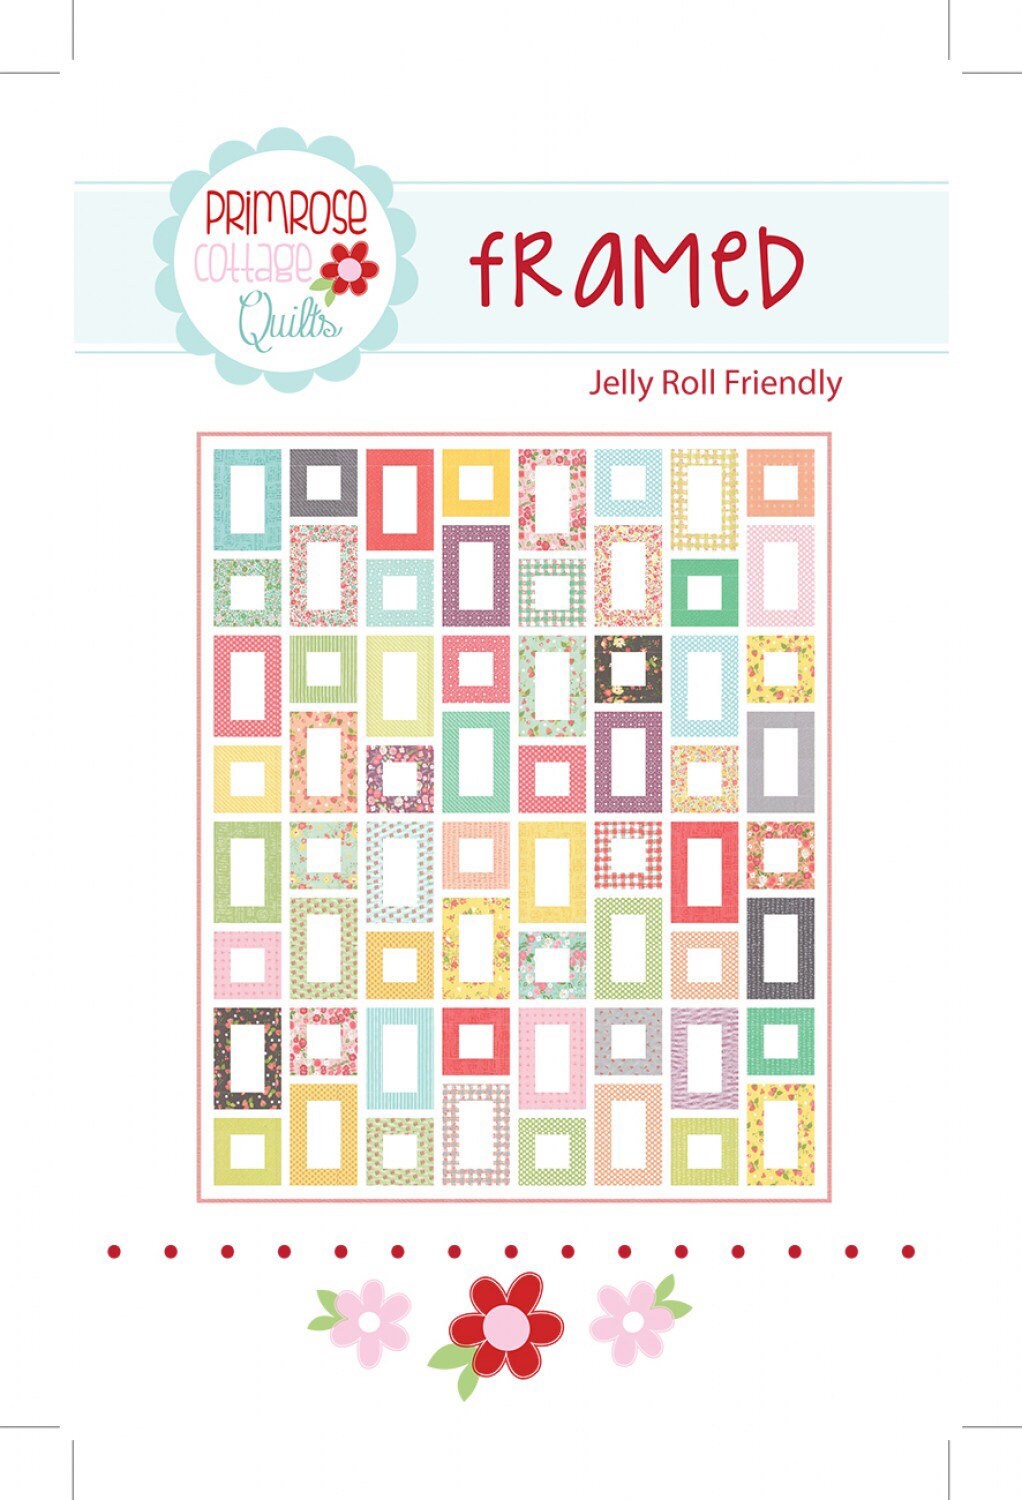 Framed Quilt Pattern - Primrose Cottage Quilts - Jelly Roll Friendly - 74” x 90”